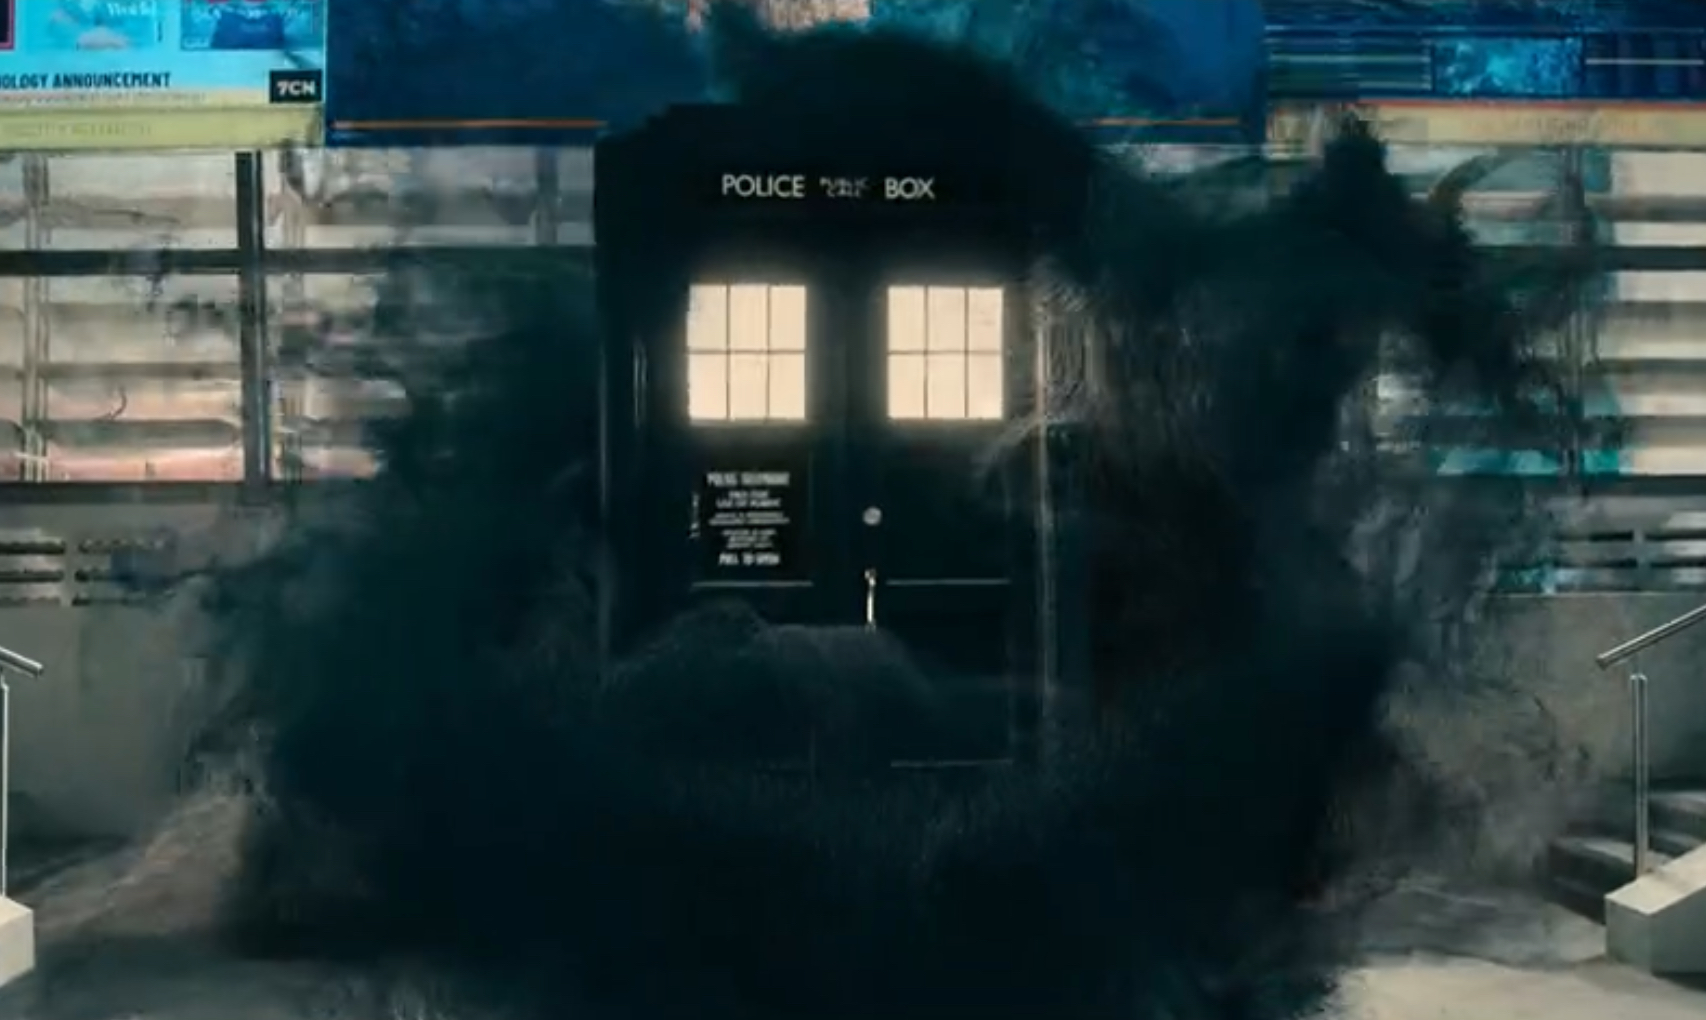 The entity attached to the TARDIS begins to manifest. (TV: The Legend of Ruby Sunday [+]Loading...["The Legend of Ruby Sunday (TV story)"])